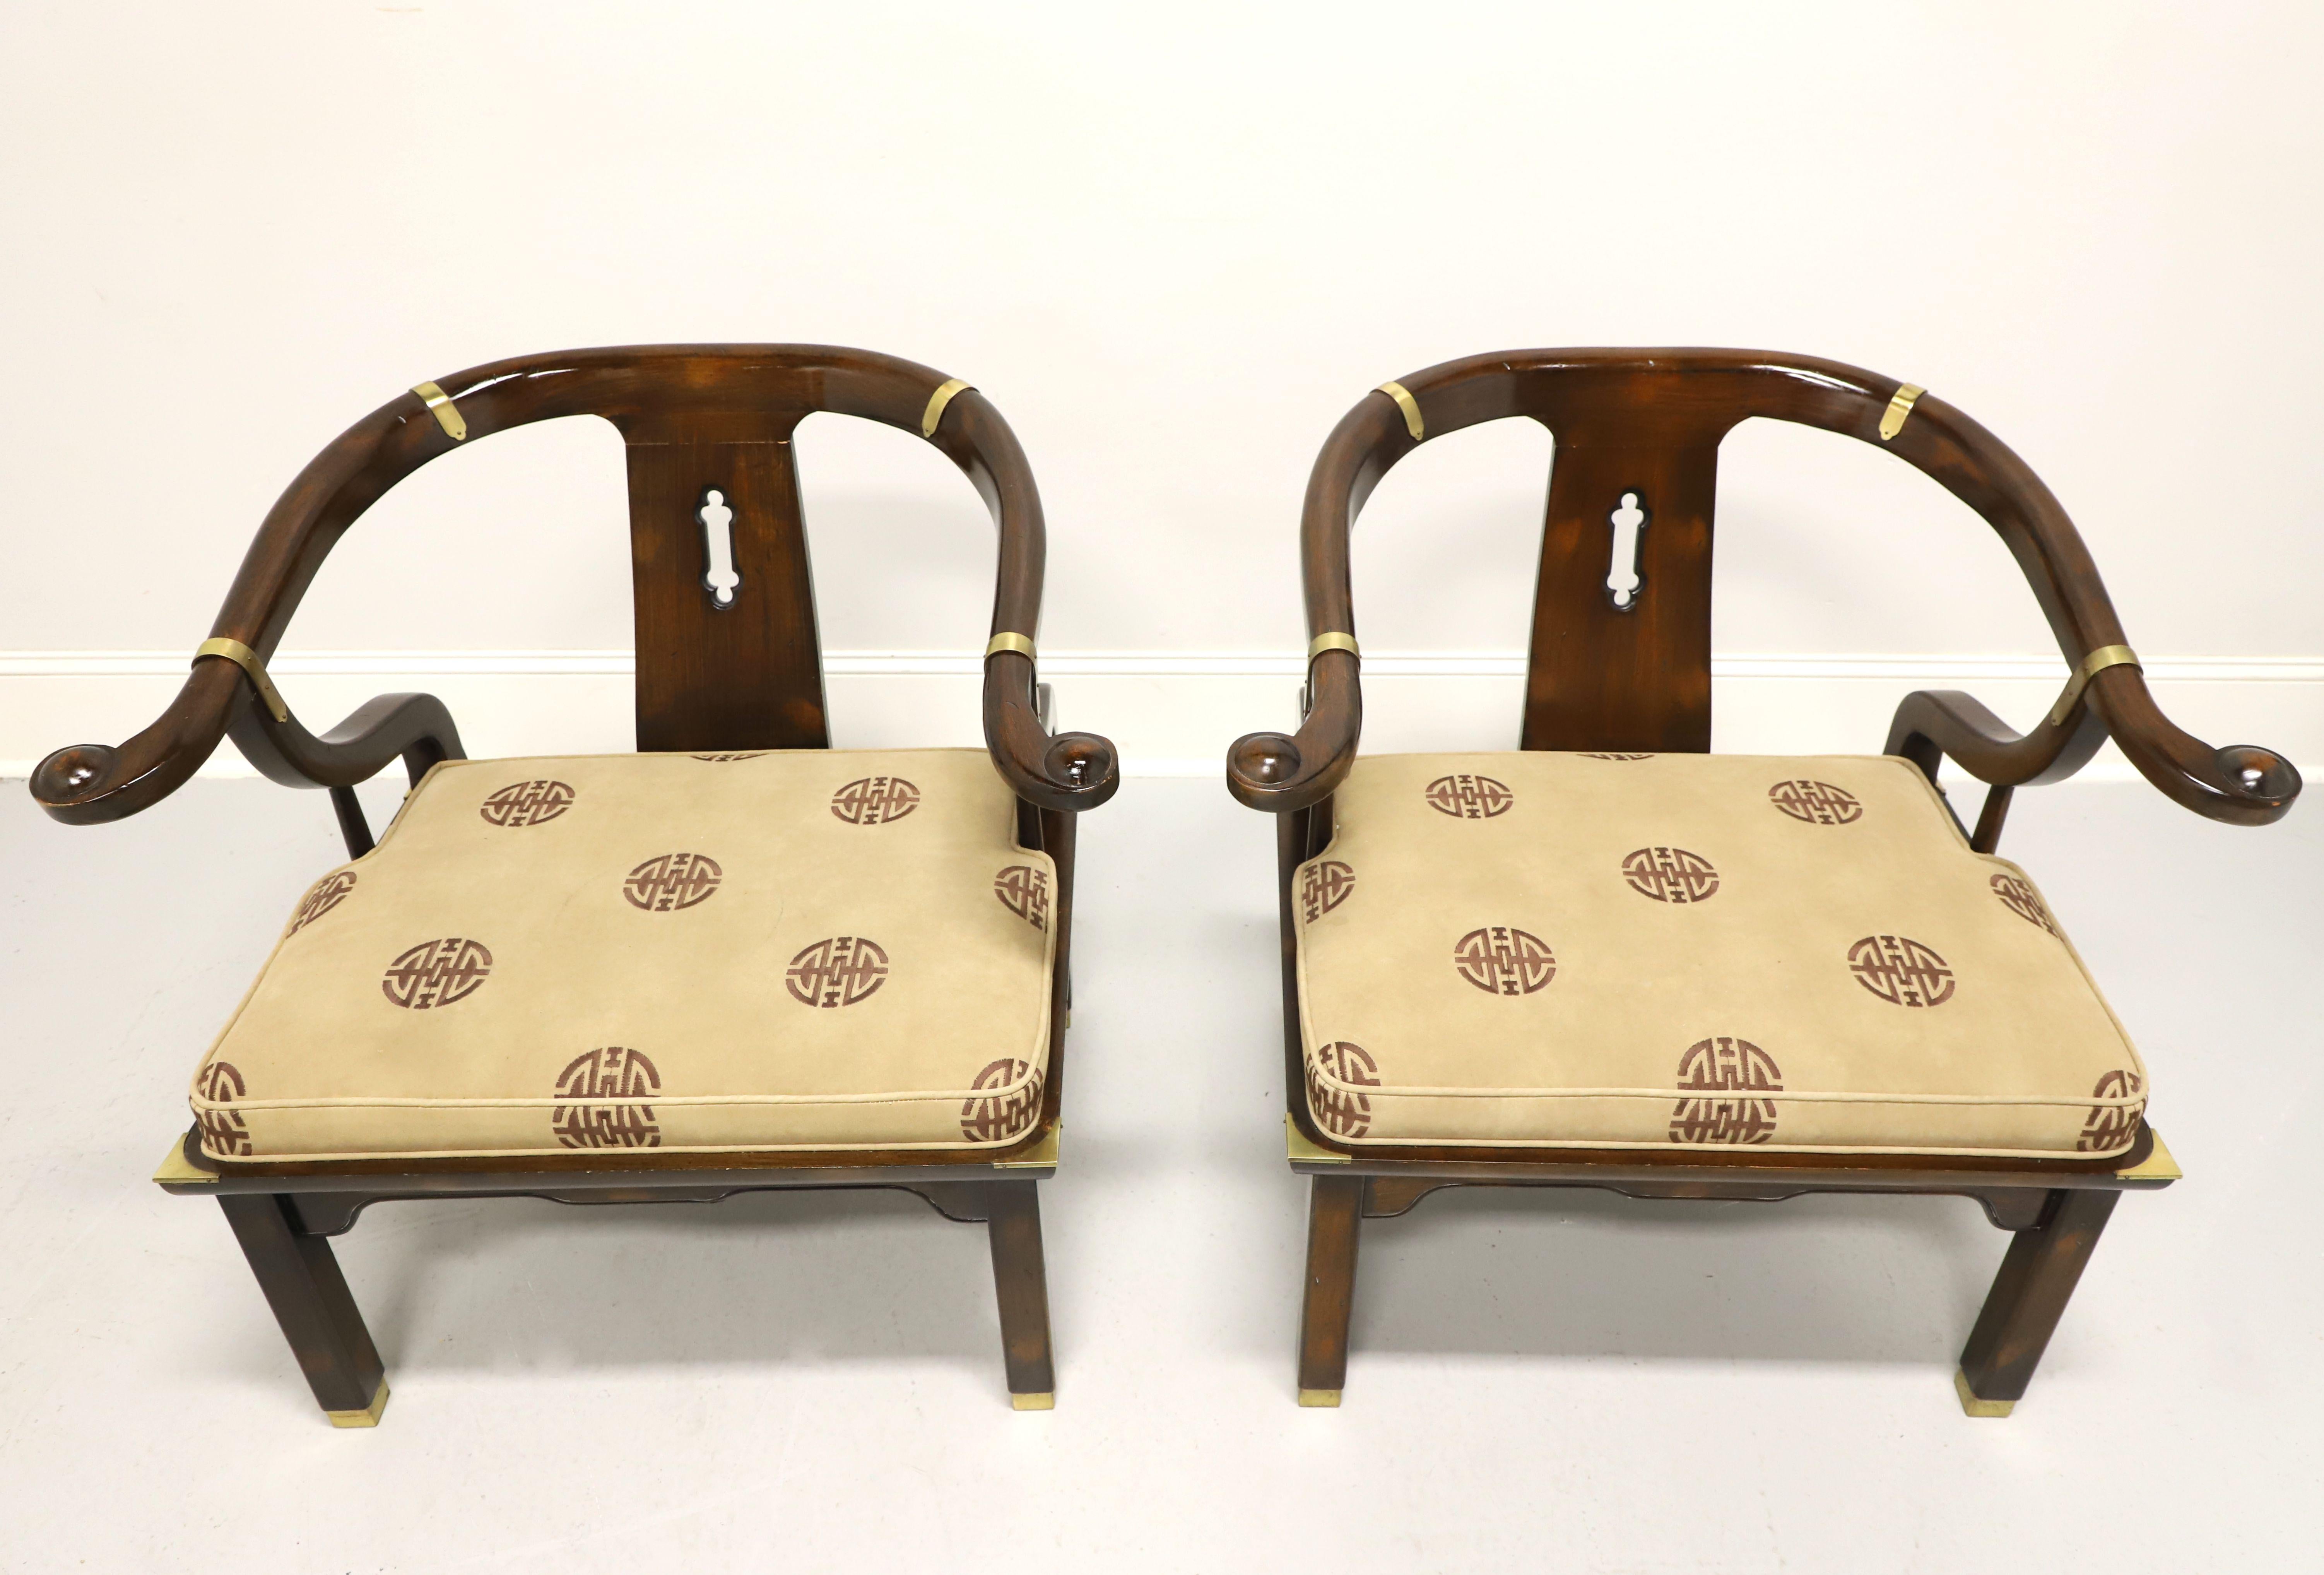 A pair of Asian Chinoiserie Ming style horseshoe armchairs in a James Mont design by Century Furniture. Solid wood frame with high gloss lacquer finish, carved backrest, horseshoe shaped arms, carved apron, beige & brown color Chinoiserie print